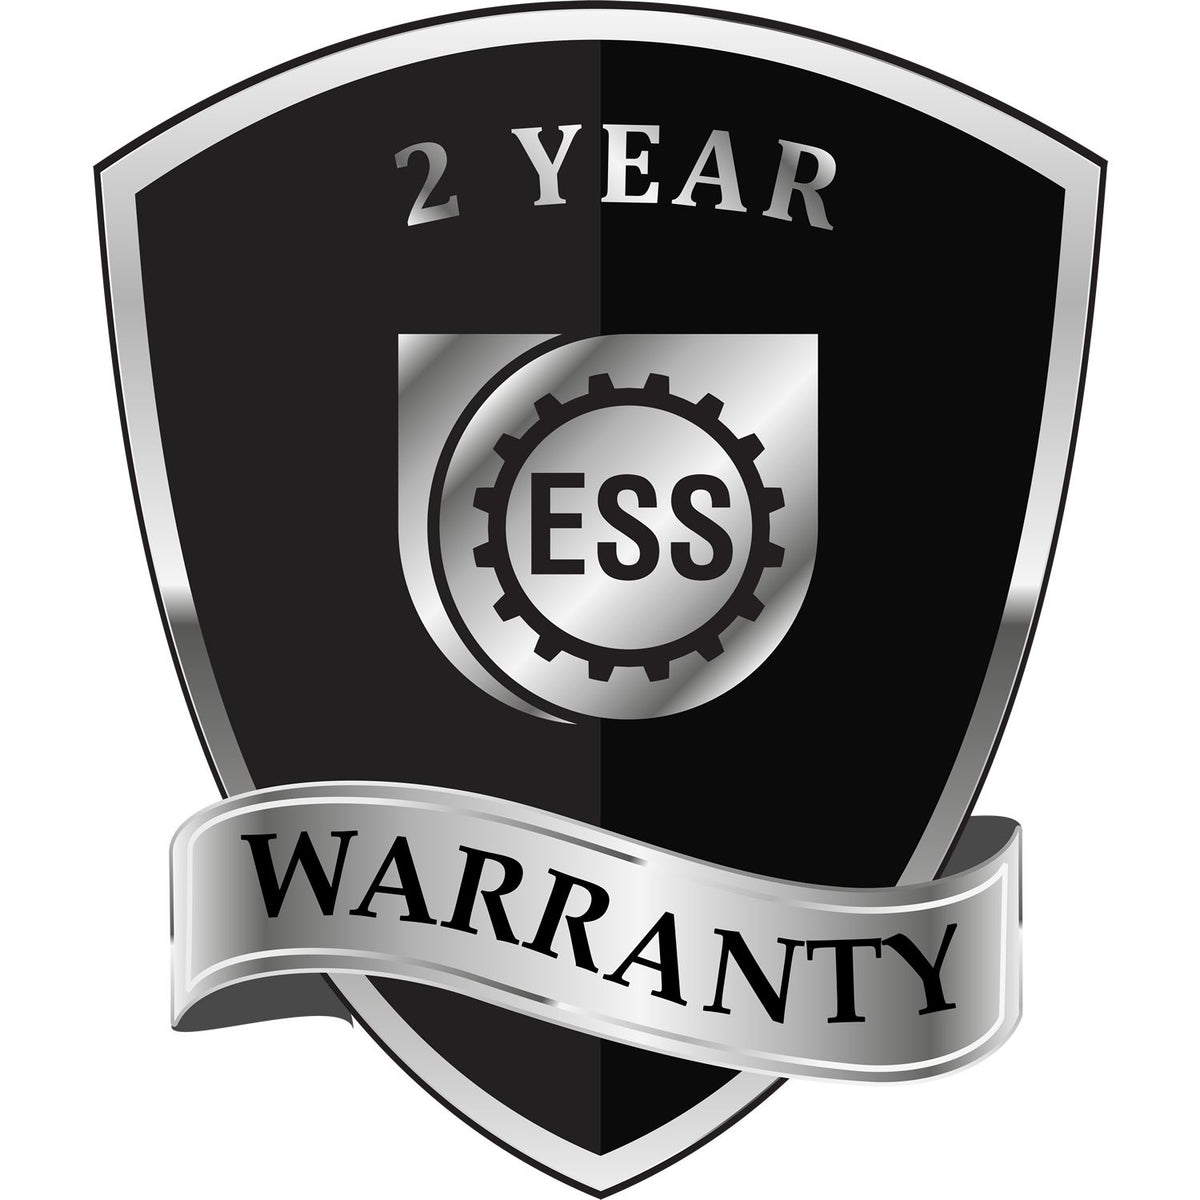 A black and silver badge or emblem showing warranty information for the Long Reach Utah Geology Seal